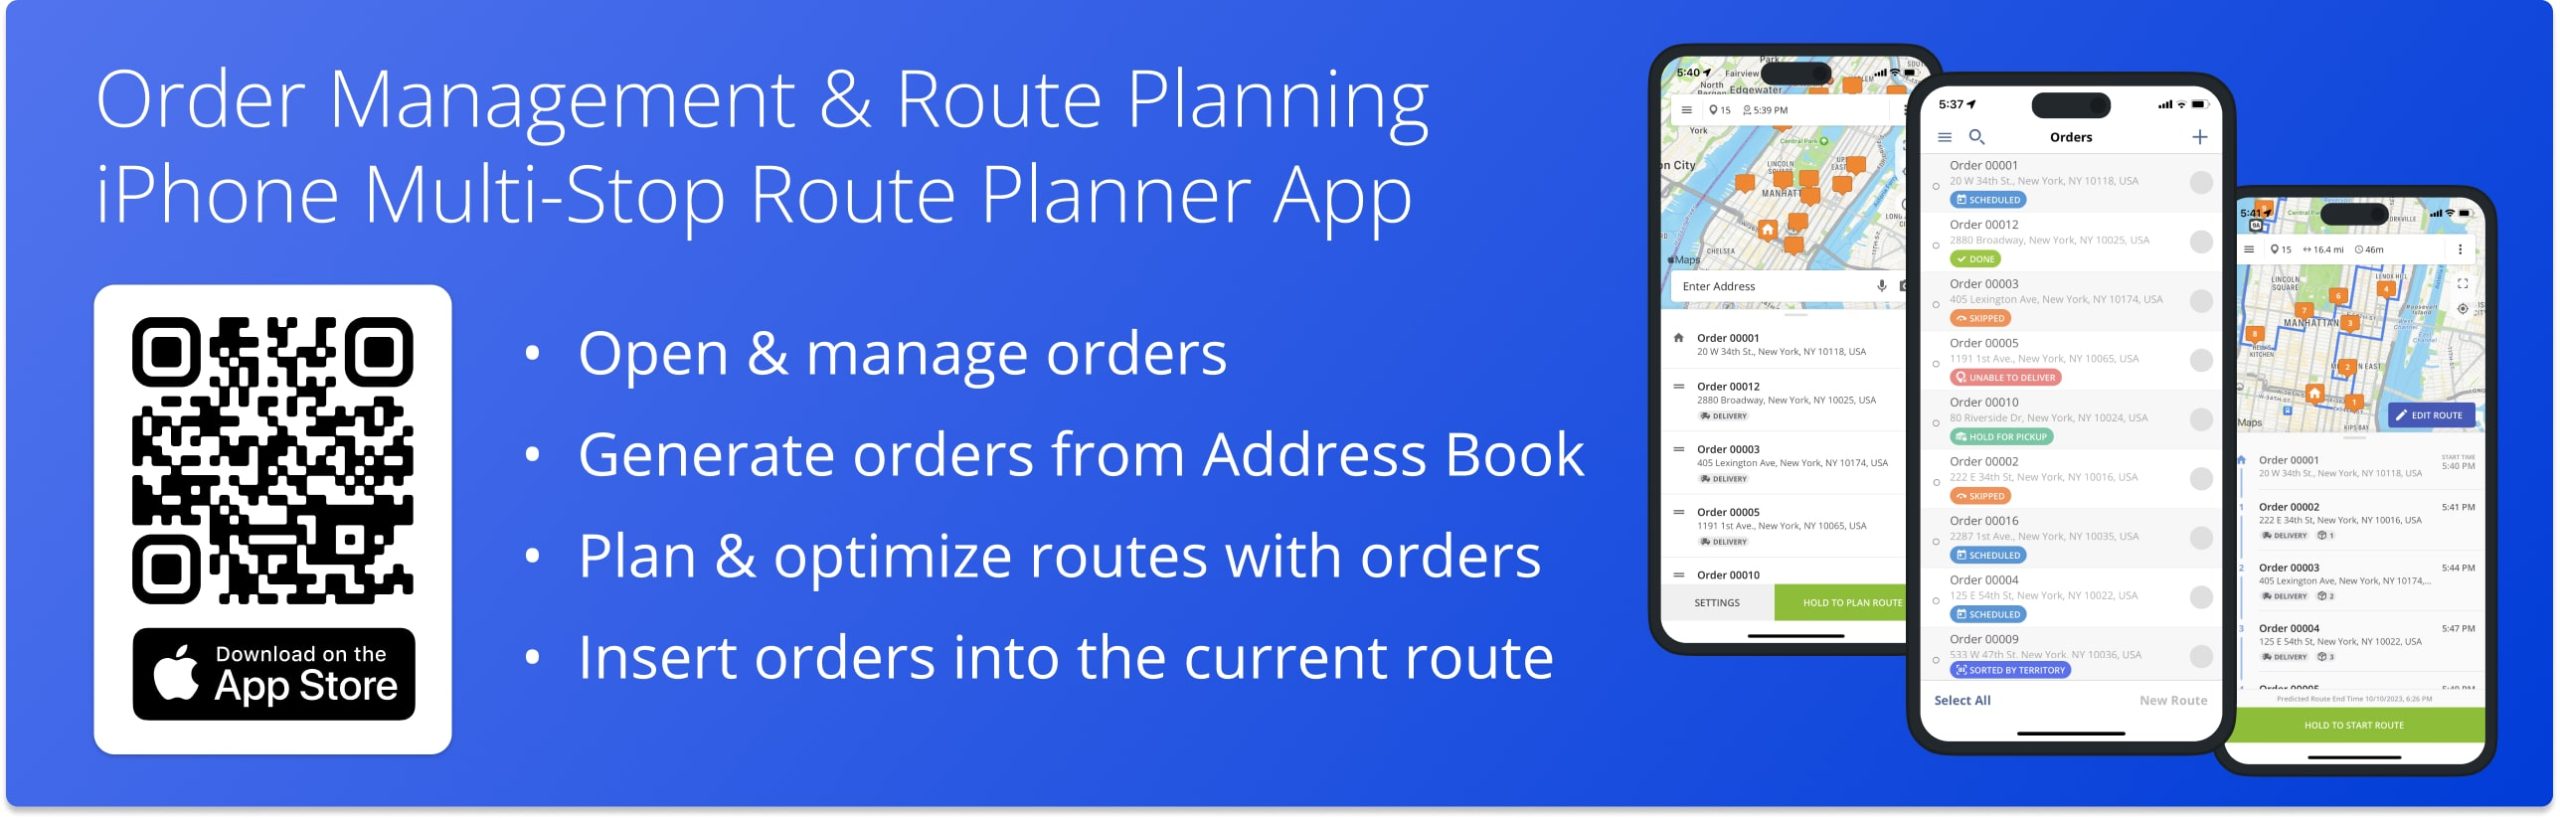 Manage orders, plan and optimize order routes, and insert orders into routes using Route4Me's iPhone Route Planner app.